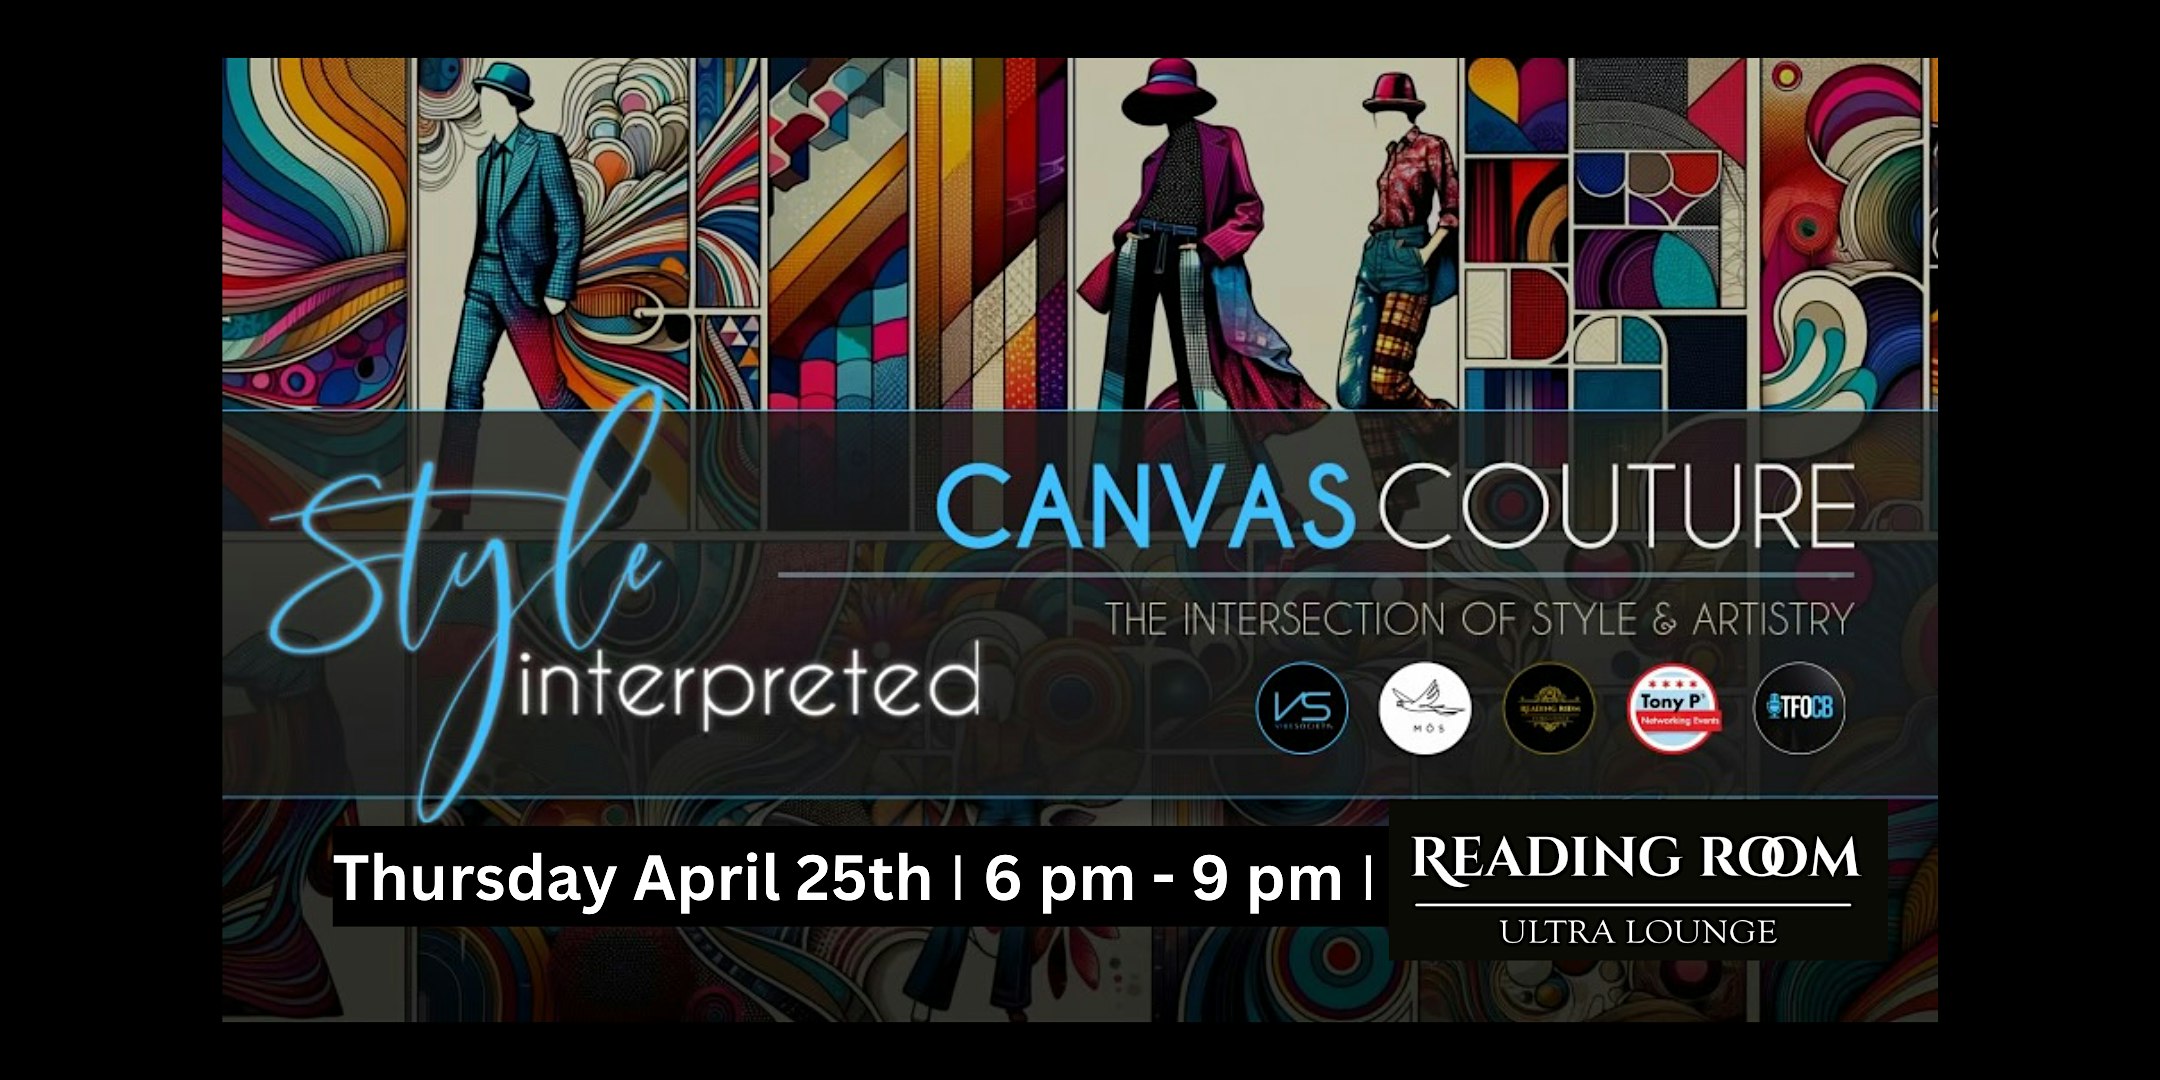 Canvas Couture Event at Reading Room: Thursday April 25th